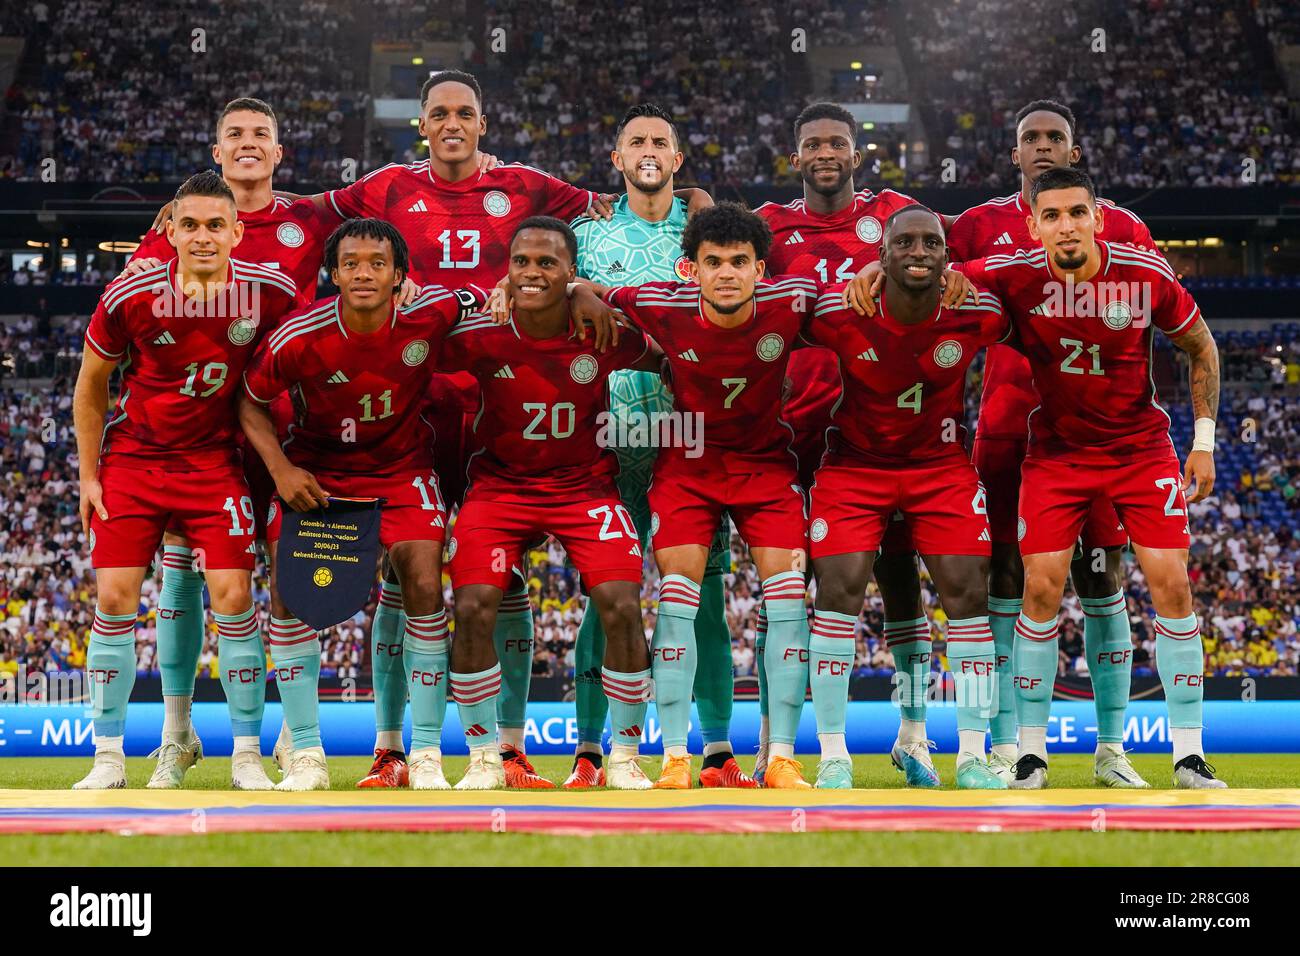 GELSENKIRCHEN, GERMANY - JUNE 20: Teamphoto of Colombia, (back row L-R) Mateus Uribe of Colombia, Yerry Mina of Colombia, Goalkeeper Camilo Vargas of Colombia, Jefferson Lerma of Colombia, Jhon Lucumi of Colombia, (front row L-R) Rafael Santos Borre of Colombia, Juan Cuadrado of Colombia, Jhon Arias of Colombia, Luis Diaz of Colombia, Deiver Machado of Colombia, Daniel Munoz of Colombia during the International Friendly match between Germany and Colombia at the Veltins-Arena on June 20, 2023 in Gelsenkirchen, Germany (Photo by Joris Verwijst/Orange Pictures) Stock Photo